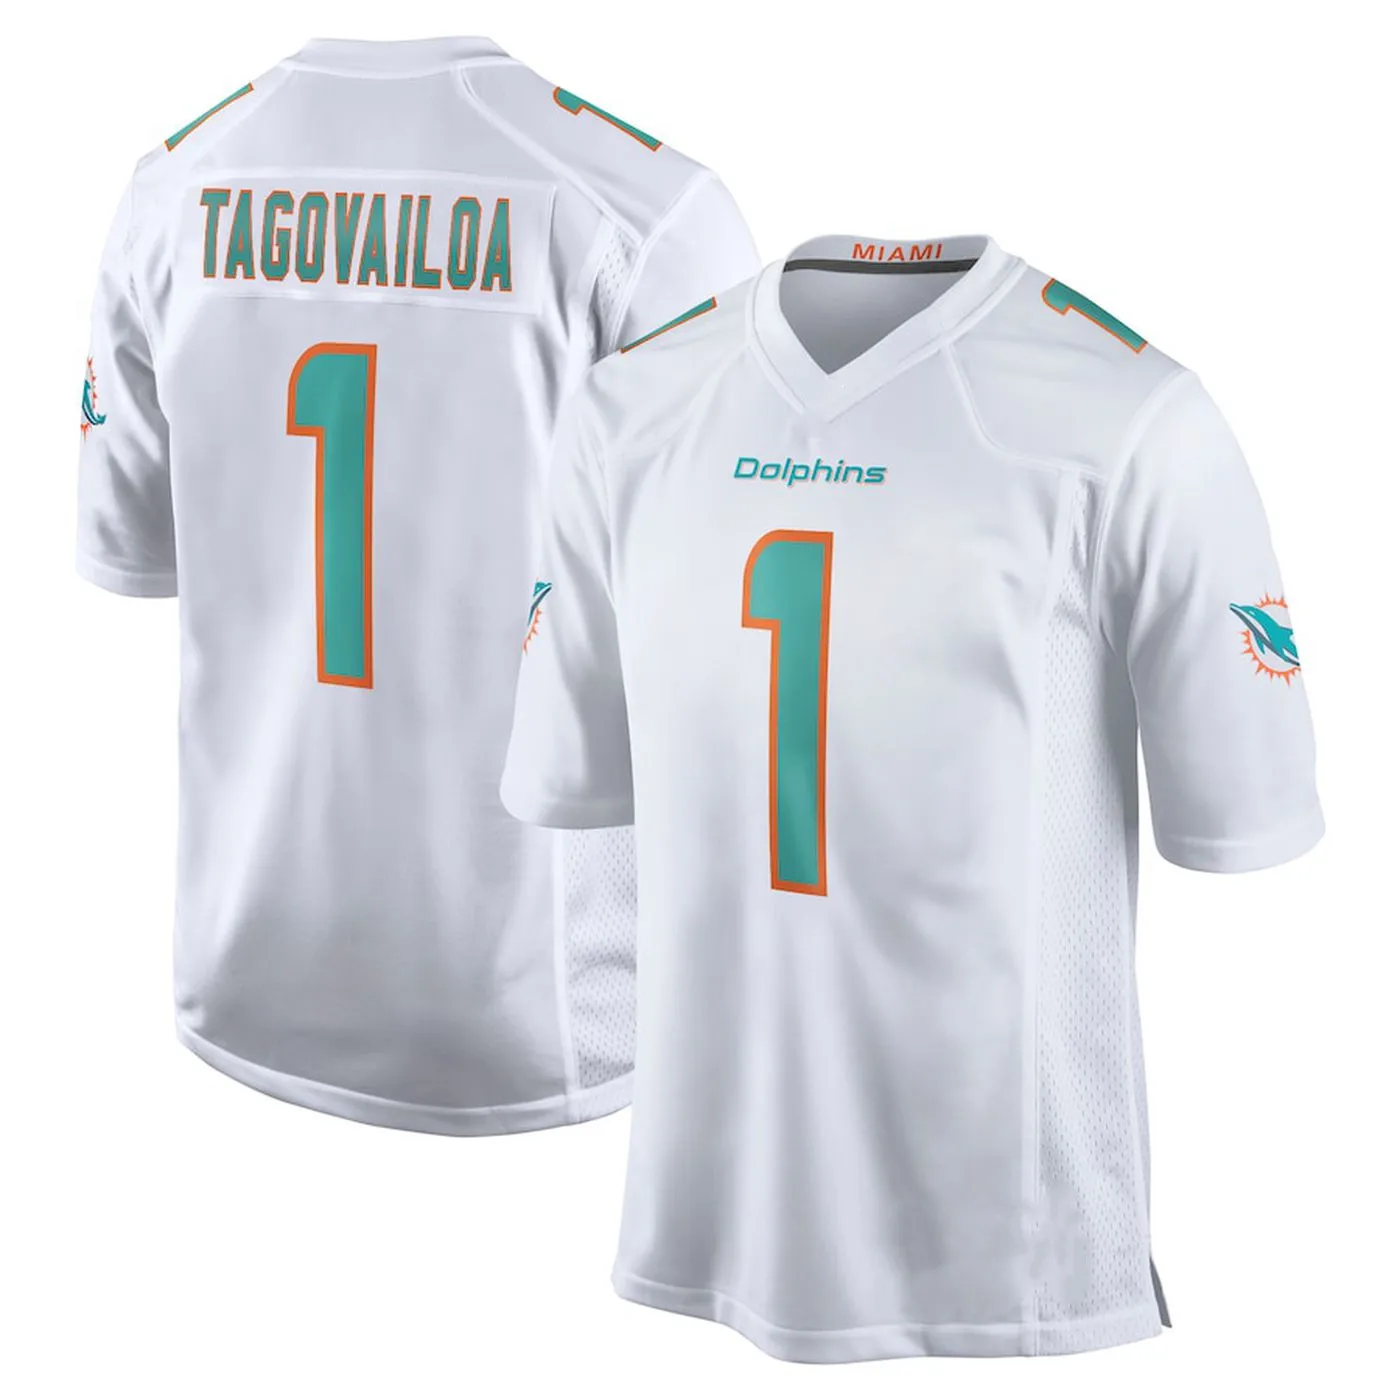 

Wholesale Best Quality Custom Your Name Number Logo Miami Stitched American Football Jerseys Dolphin 1 Tagovailoa Parker Marino, White, black, yellow, orange, blue, gray, red, purple